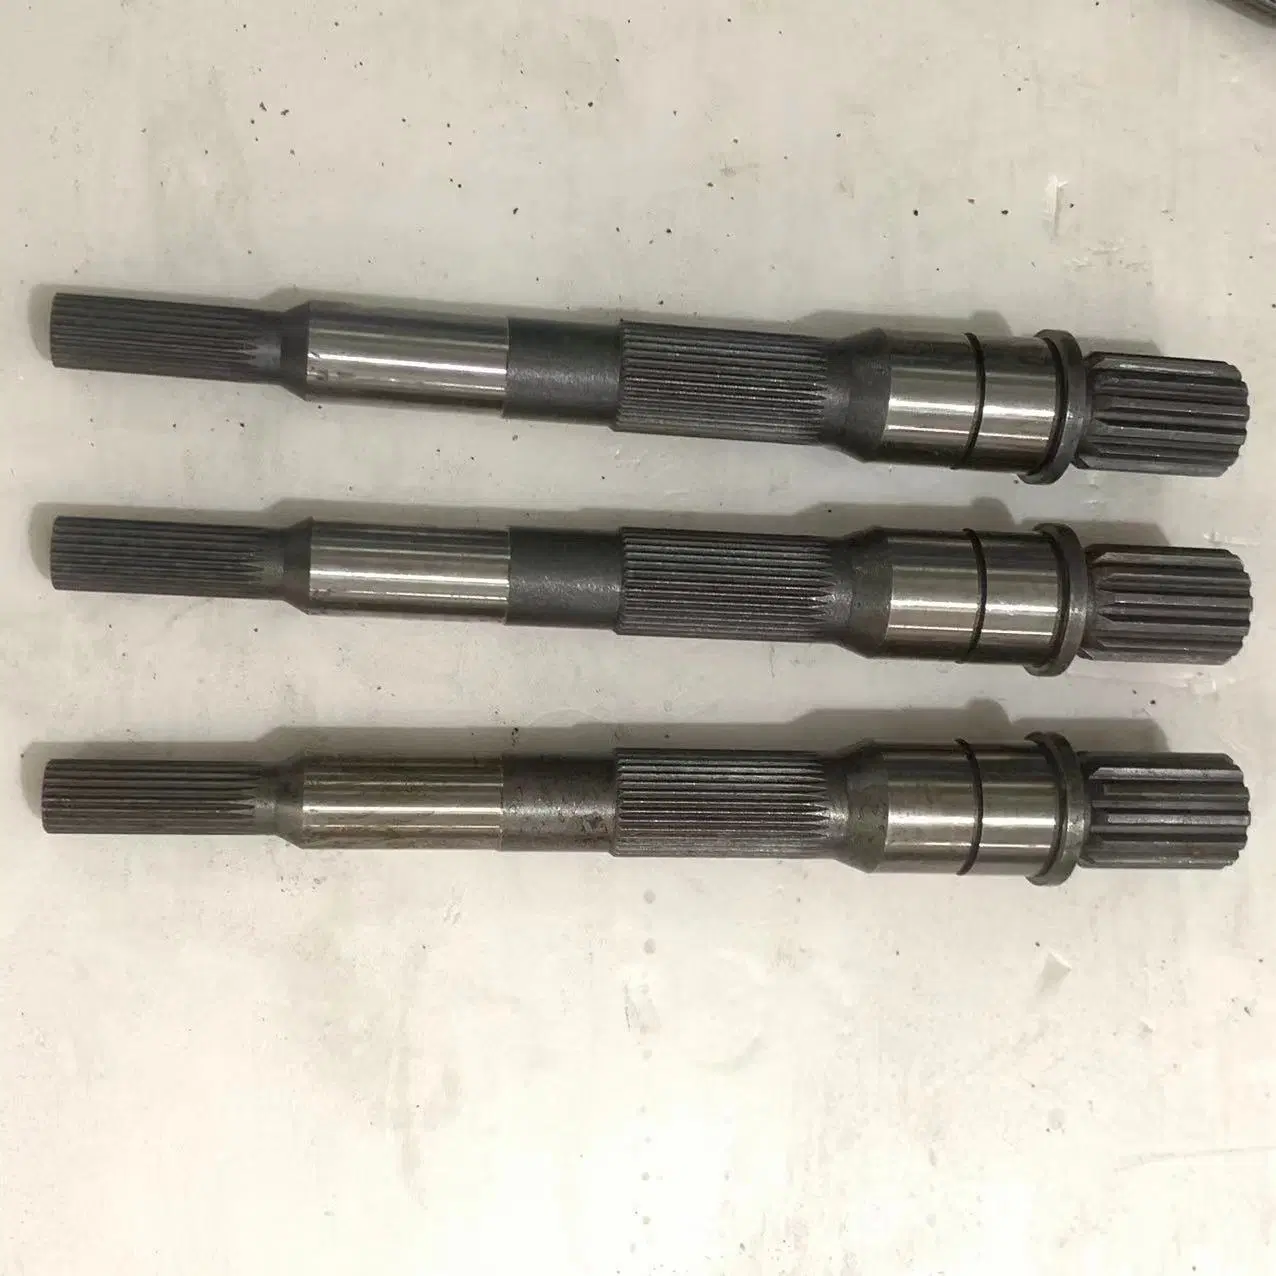 Agricultural Machinery Uses Power Transmission Shafts, Transmission Shafts, Factory Steel Precision Transmission Machinery Parts, Transmissions, Starters10